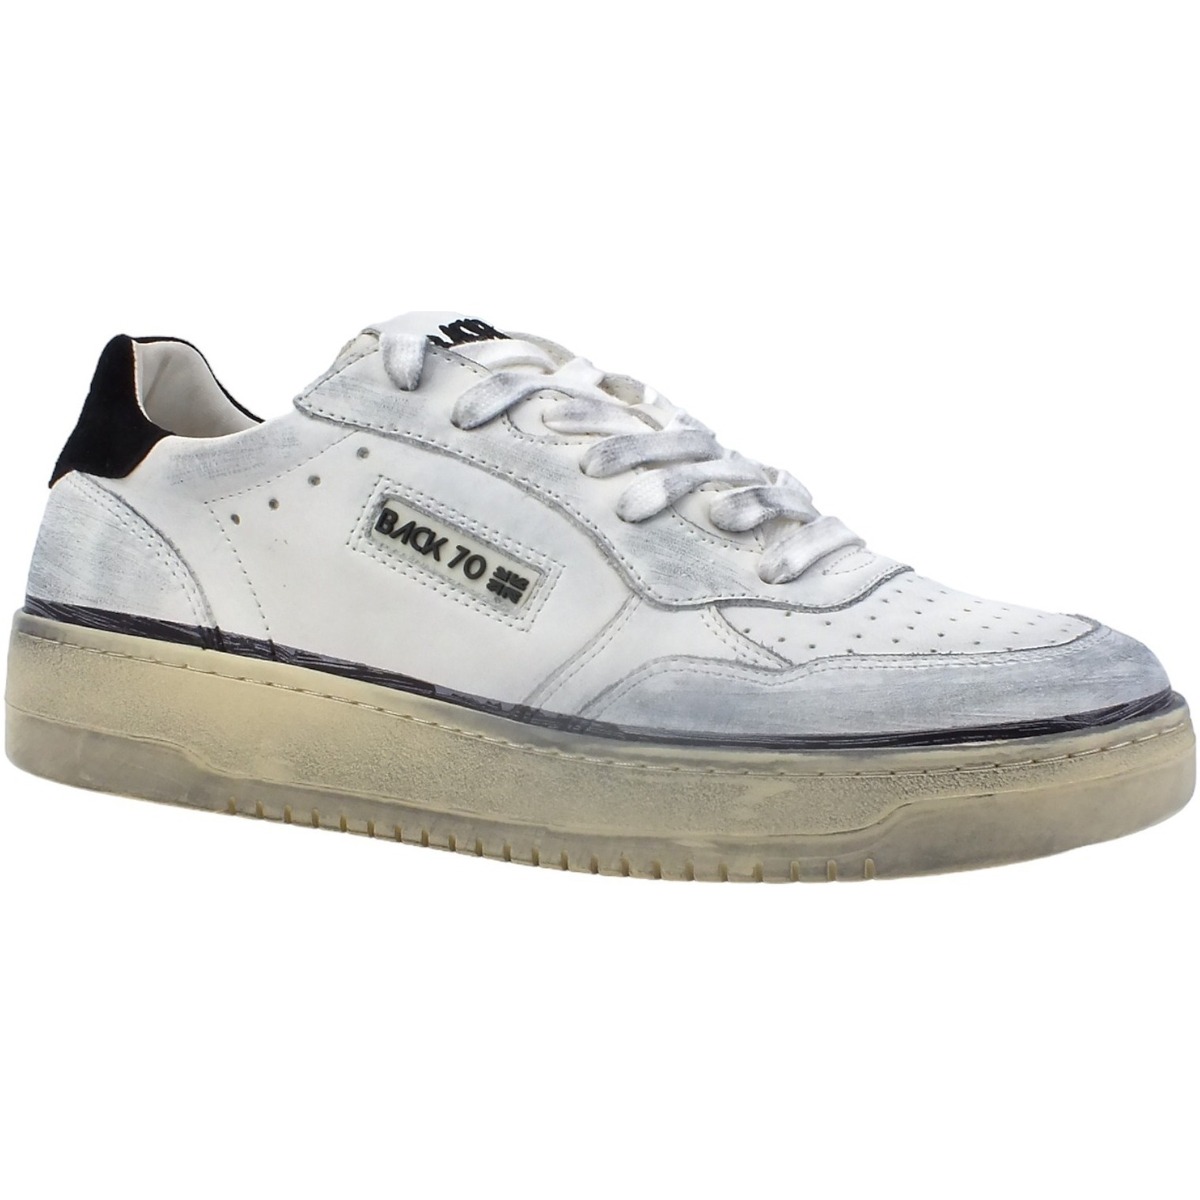 Chaussures Homme Sneakers Nike Air Force 1 Supreme Marok 1world Sortie Le 13 Décembre 2008 BACK70 Slam Vintage Sneaker Uomo White Black 108002 Blanc